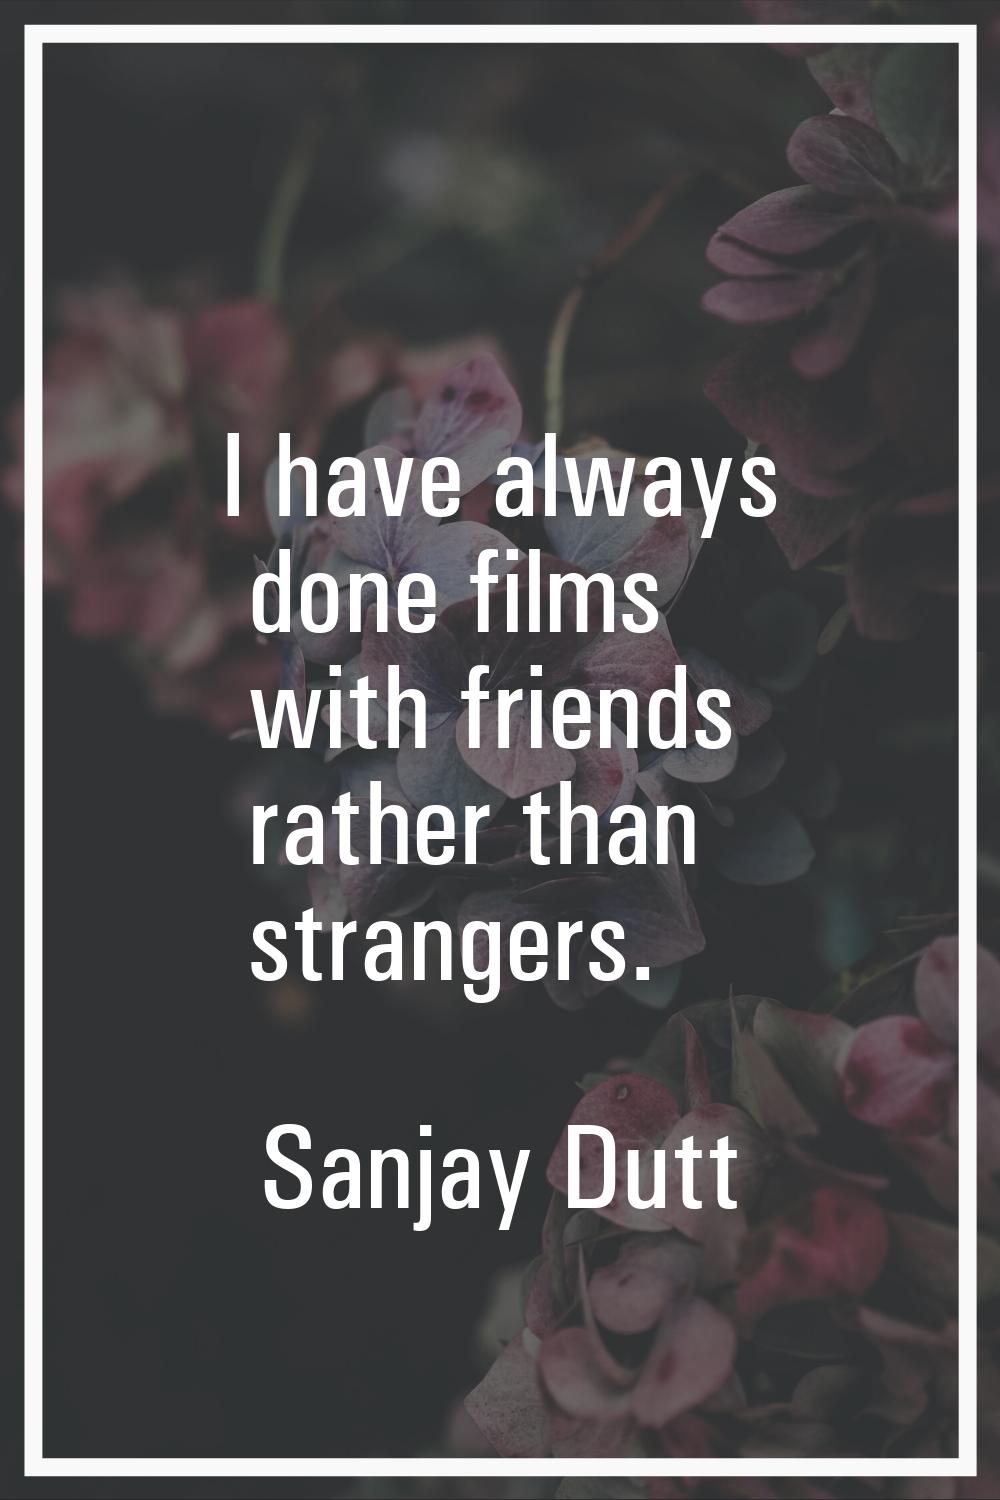 I have always done films with friends rather than strangers.